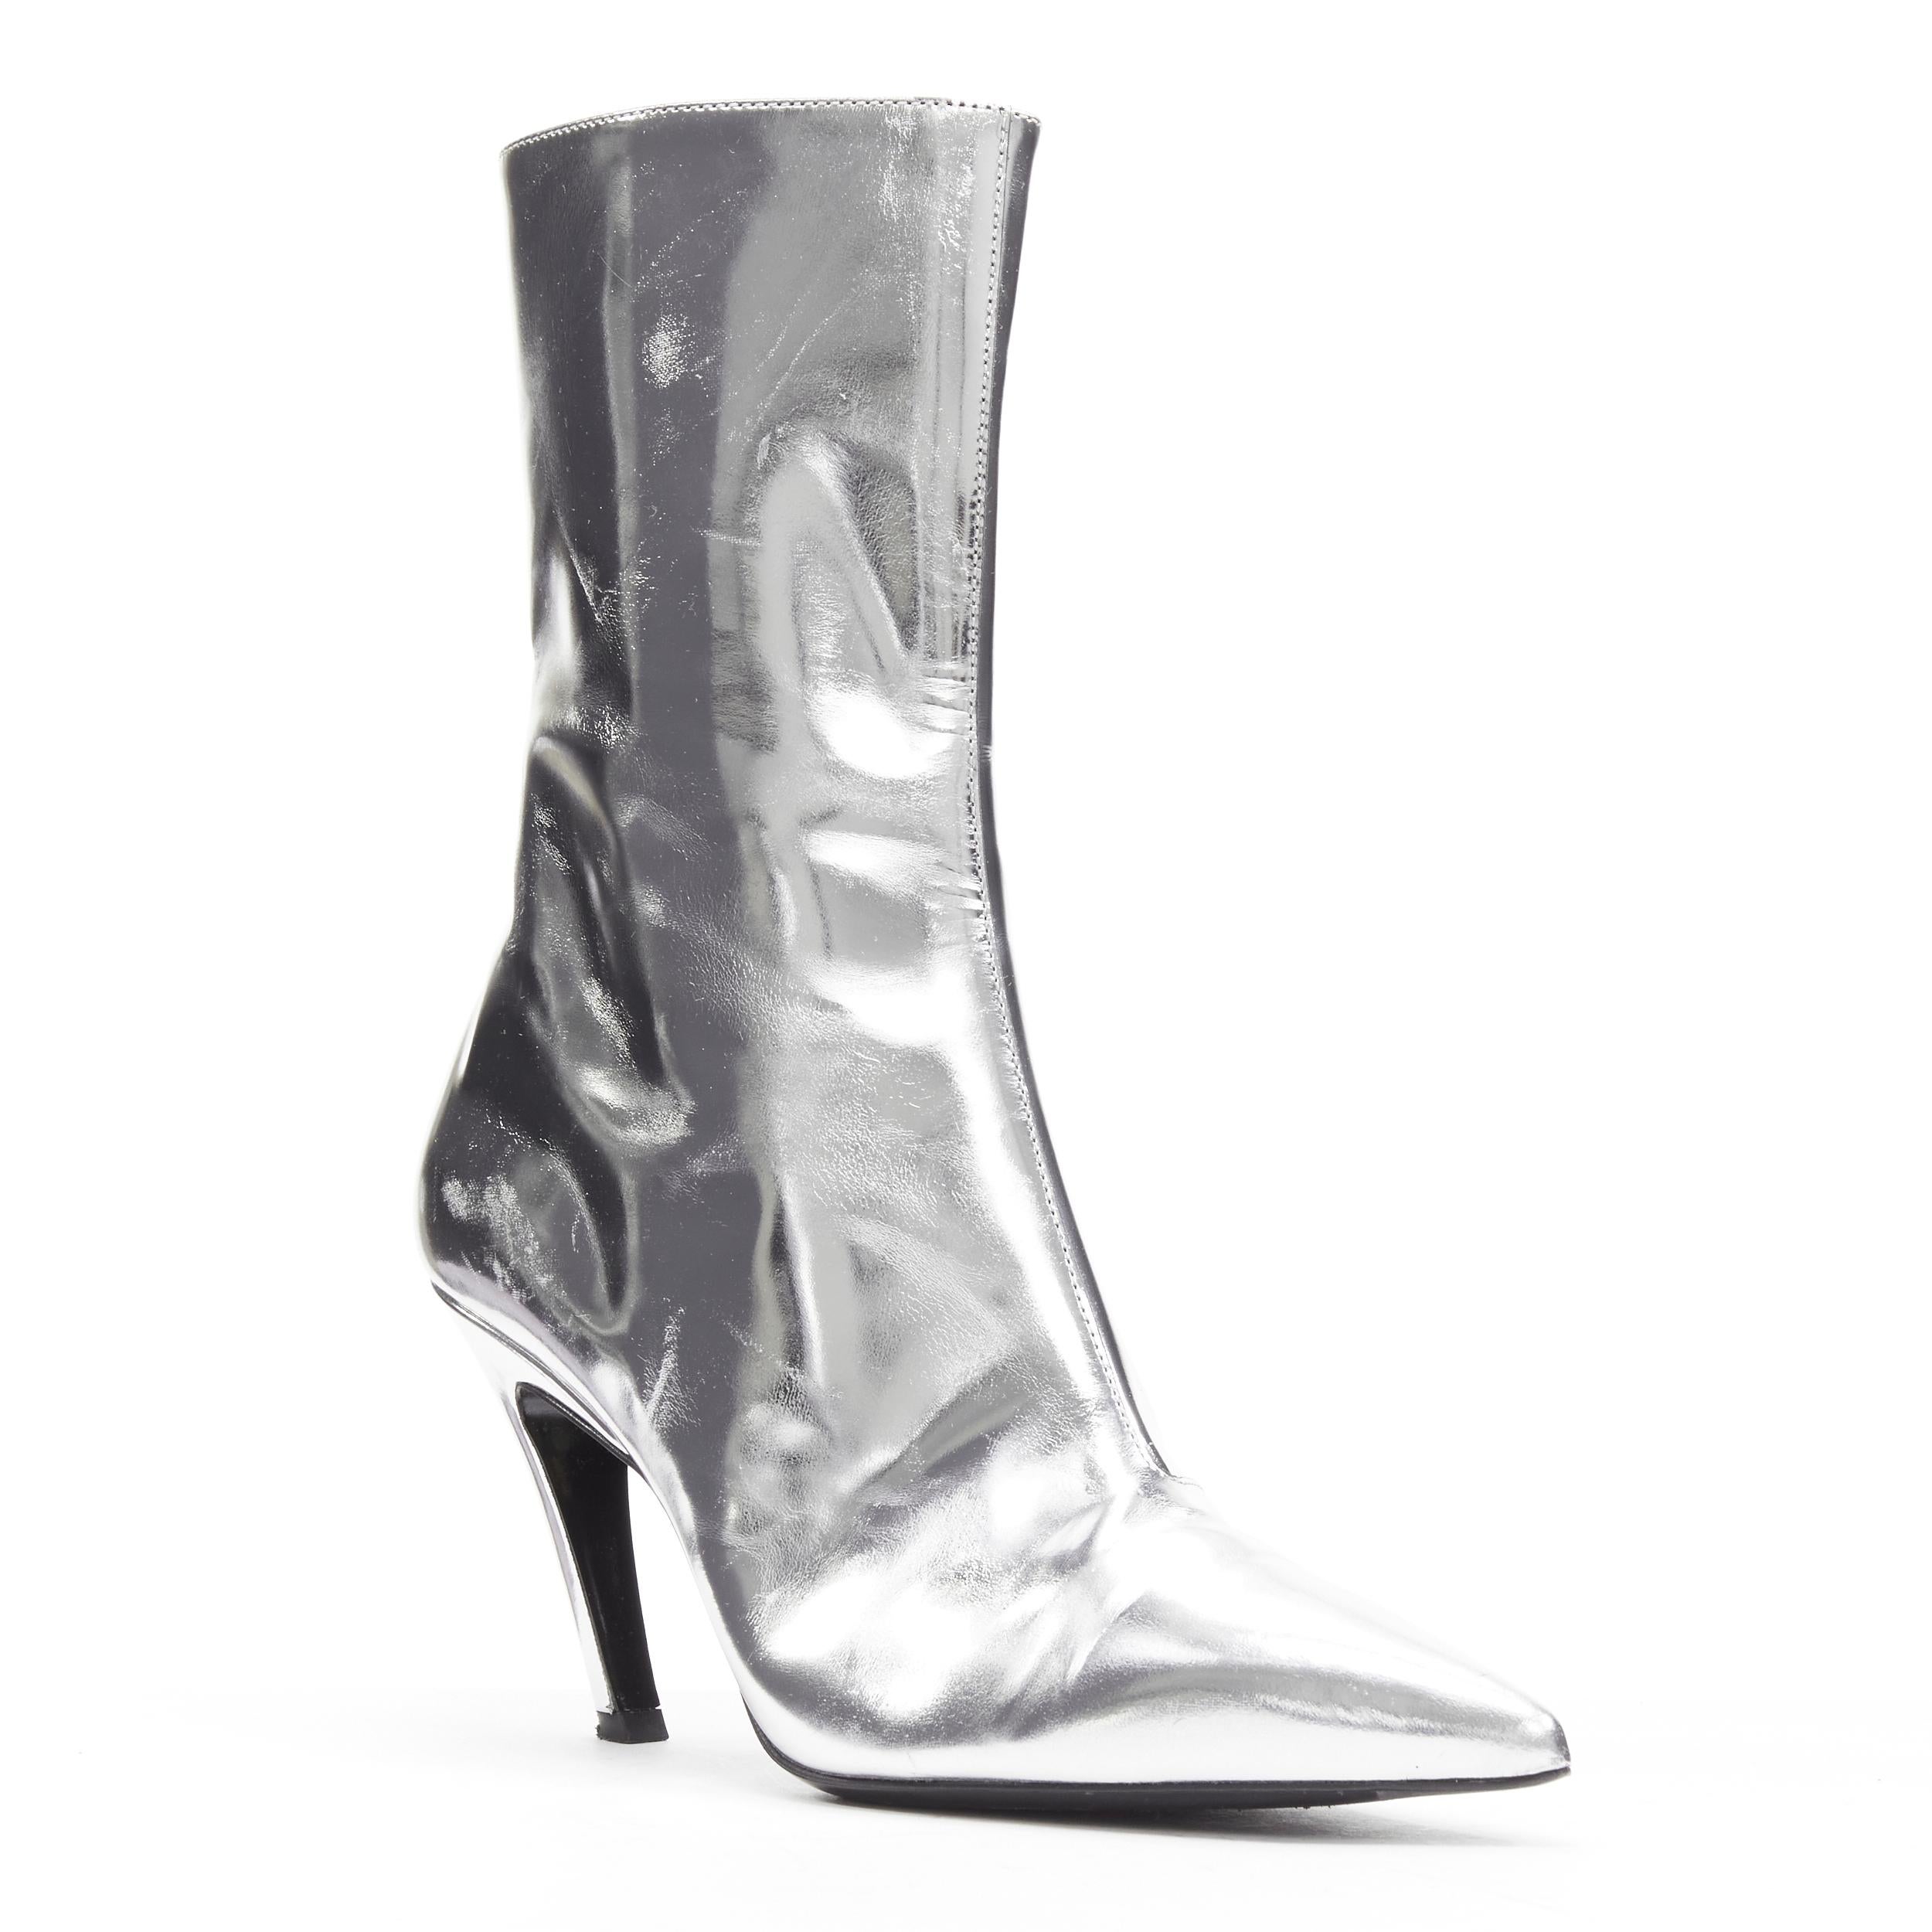 BALENCIAGA Demna silver metallic mirrored leather high ankle boots EU38
Reference: LNKO/A02140
Brand: Balenciaga
Designer: Demna
Material: Leather
Color: Silver
Pattern: Solid
Closure: Zip
Lining: Black Leather
Extra Details: Inside zip.
Made in: